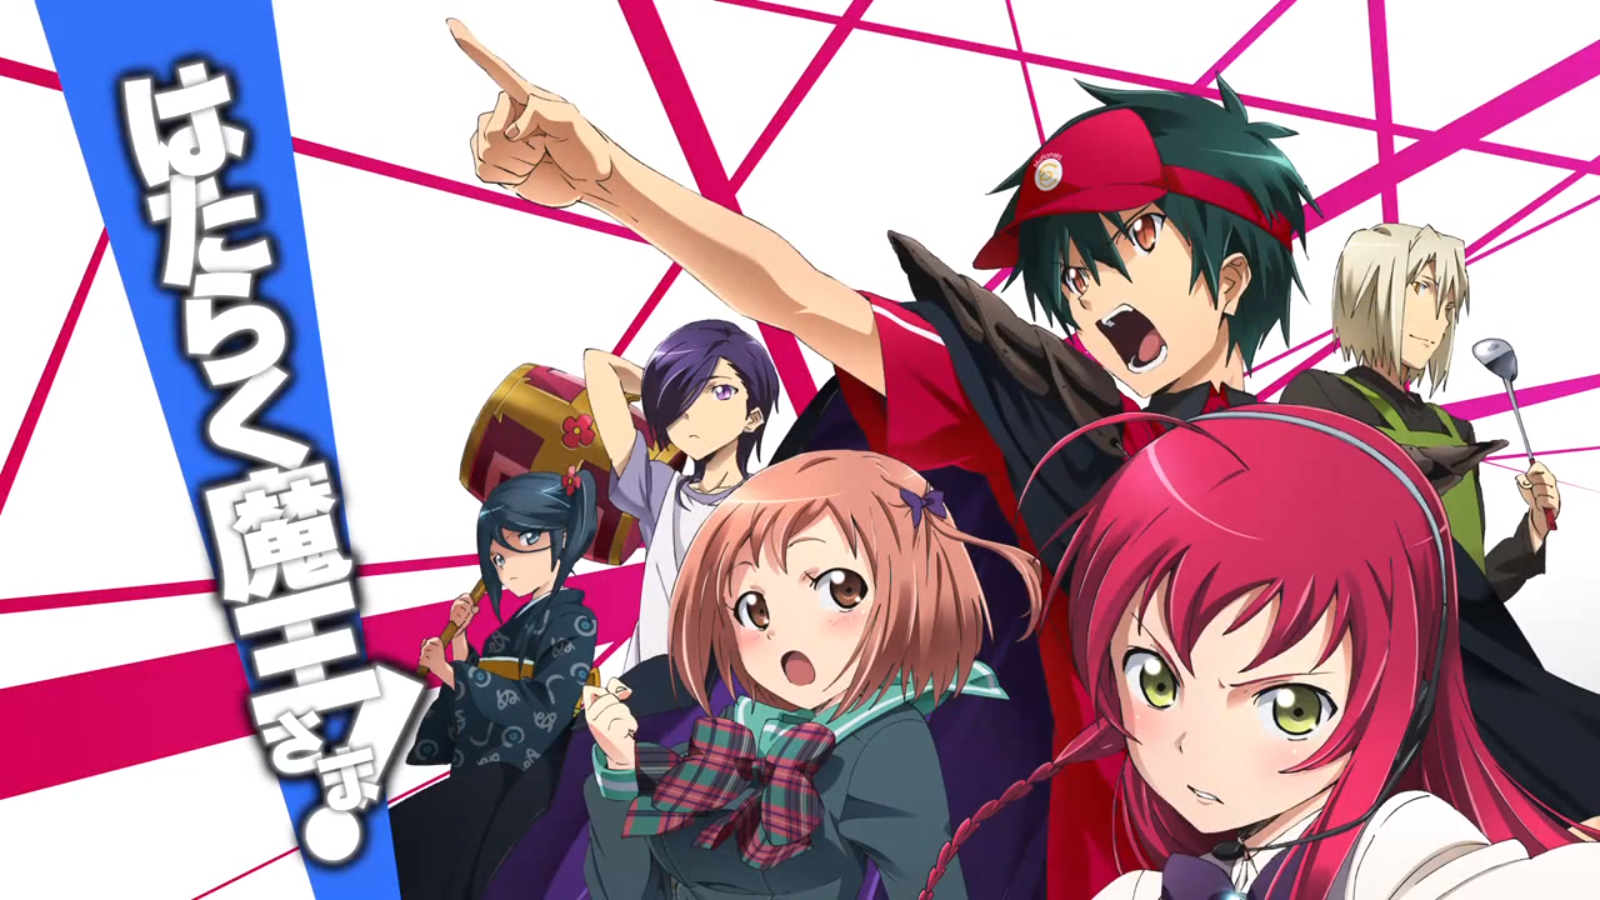 My Top 5 Anime - #5:The Devil is a Part-Timer – 